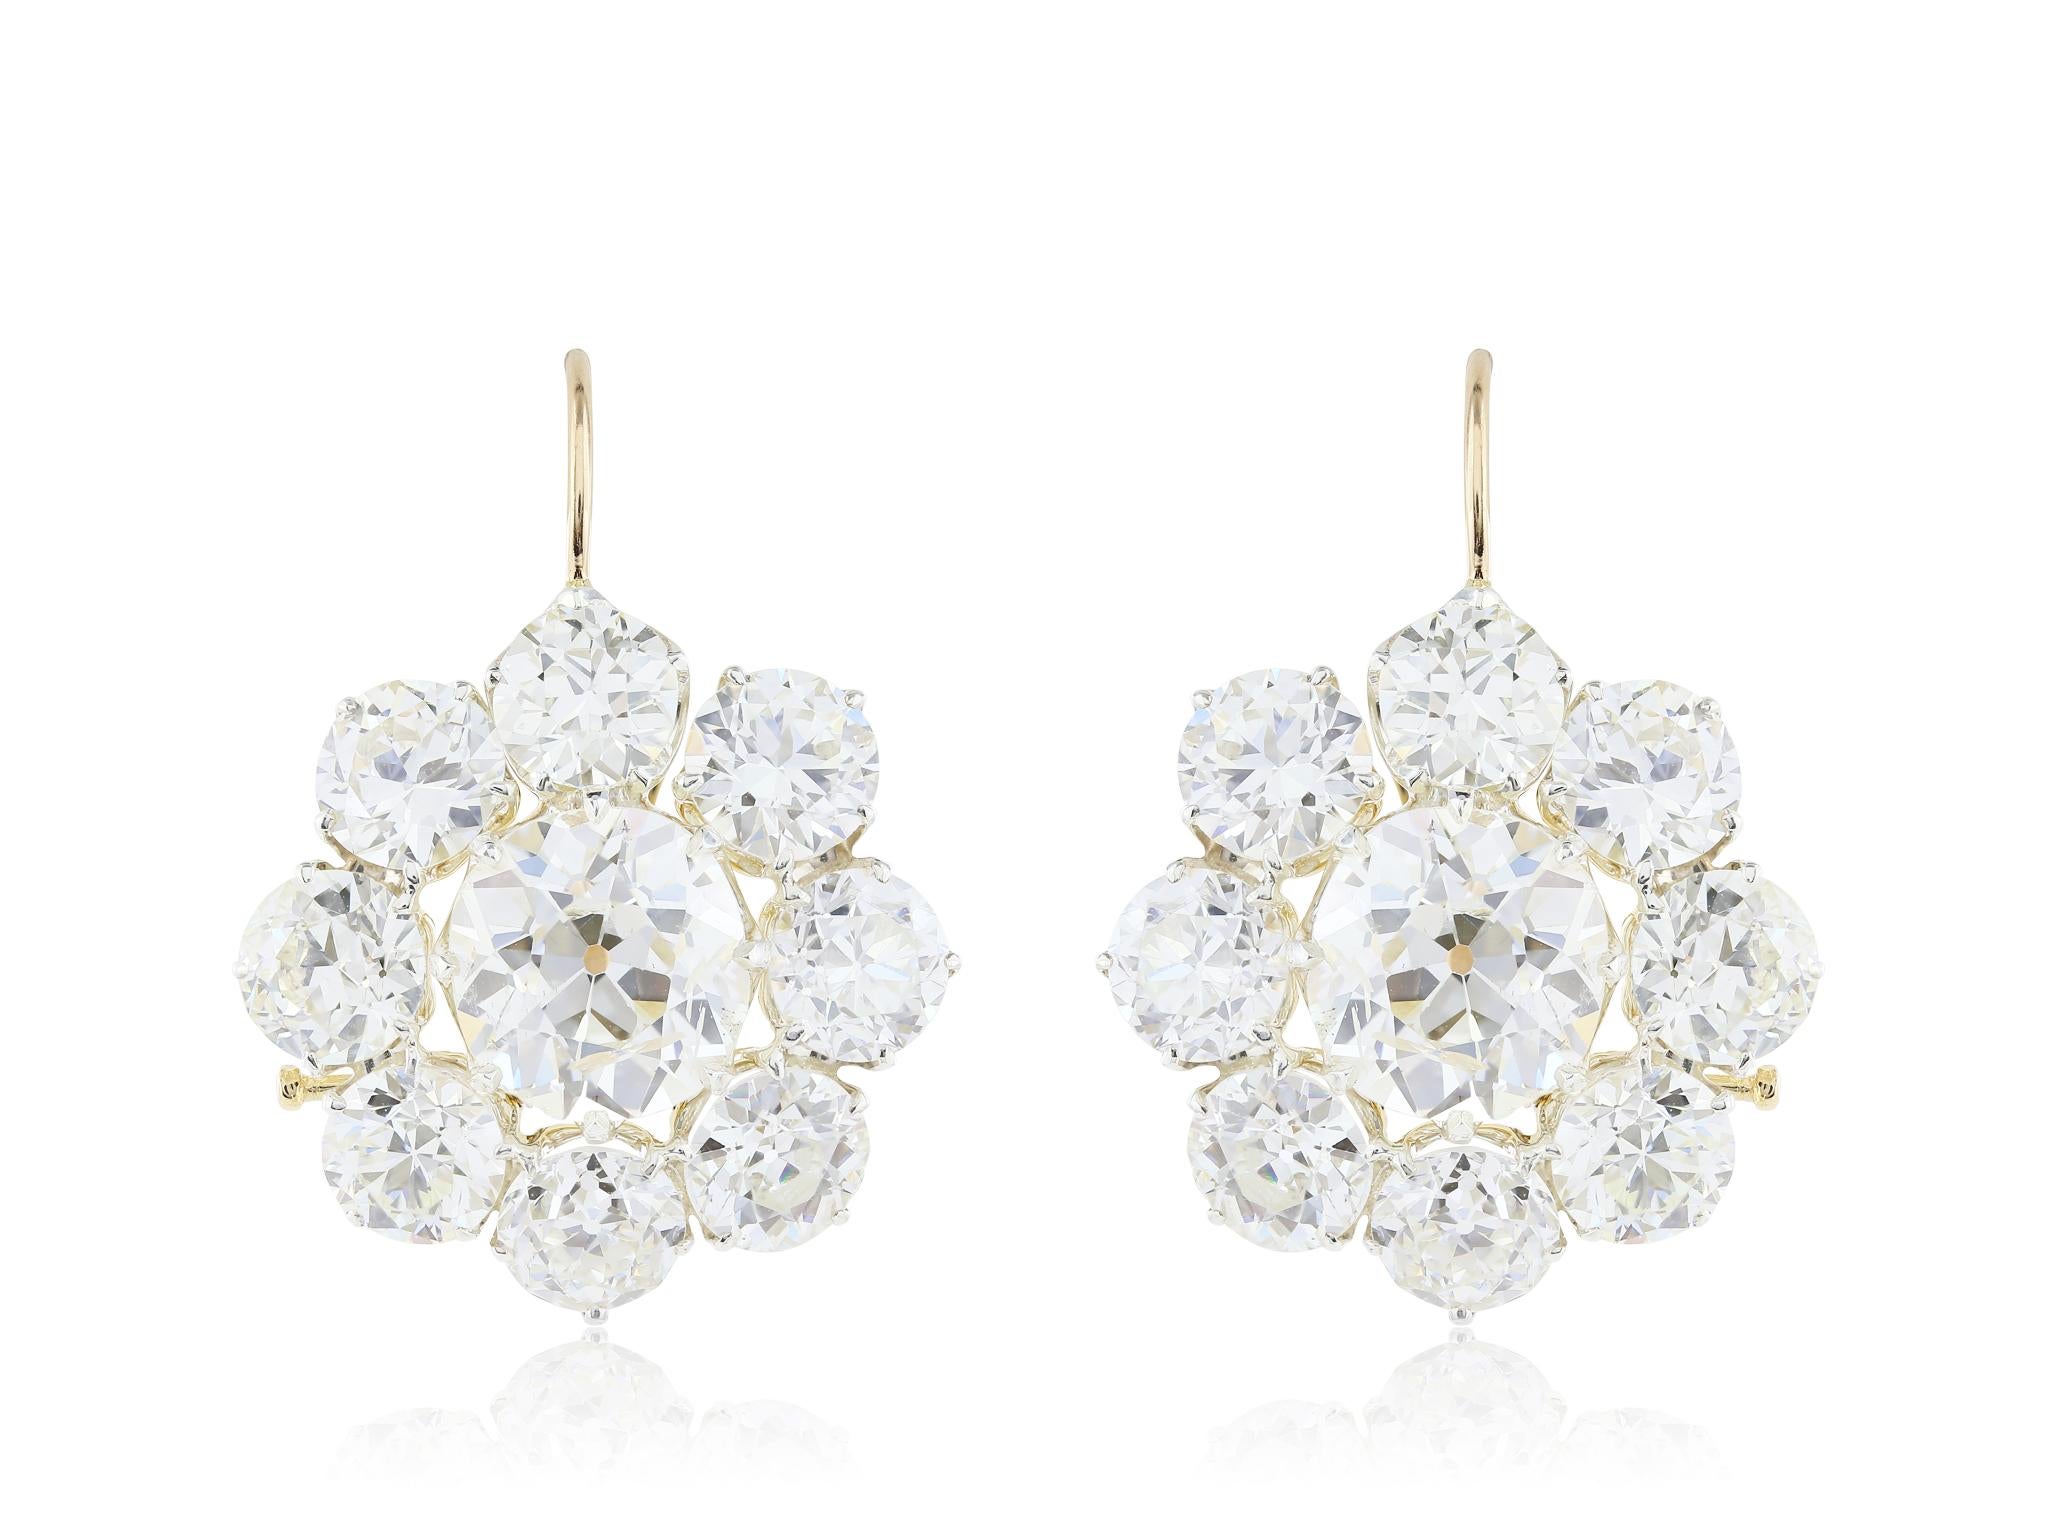 Custom made 18 karat yellow gold cluster earrings featuring 2 Old European cut diamonds, with total weight of 6.80 carats, surrounded by 16 Old European cut diamonds with a total weight of 13.48 carats, diamonds are graded approximately for color